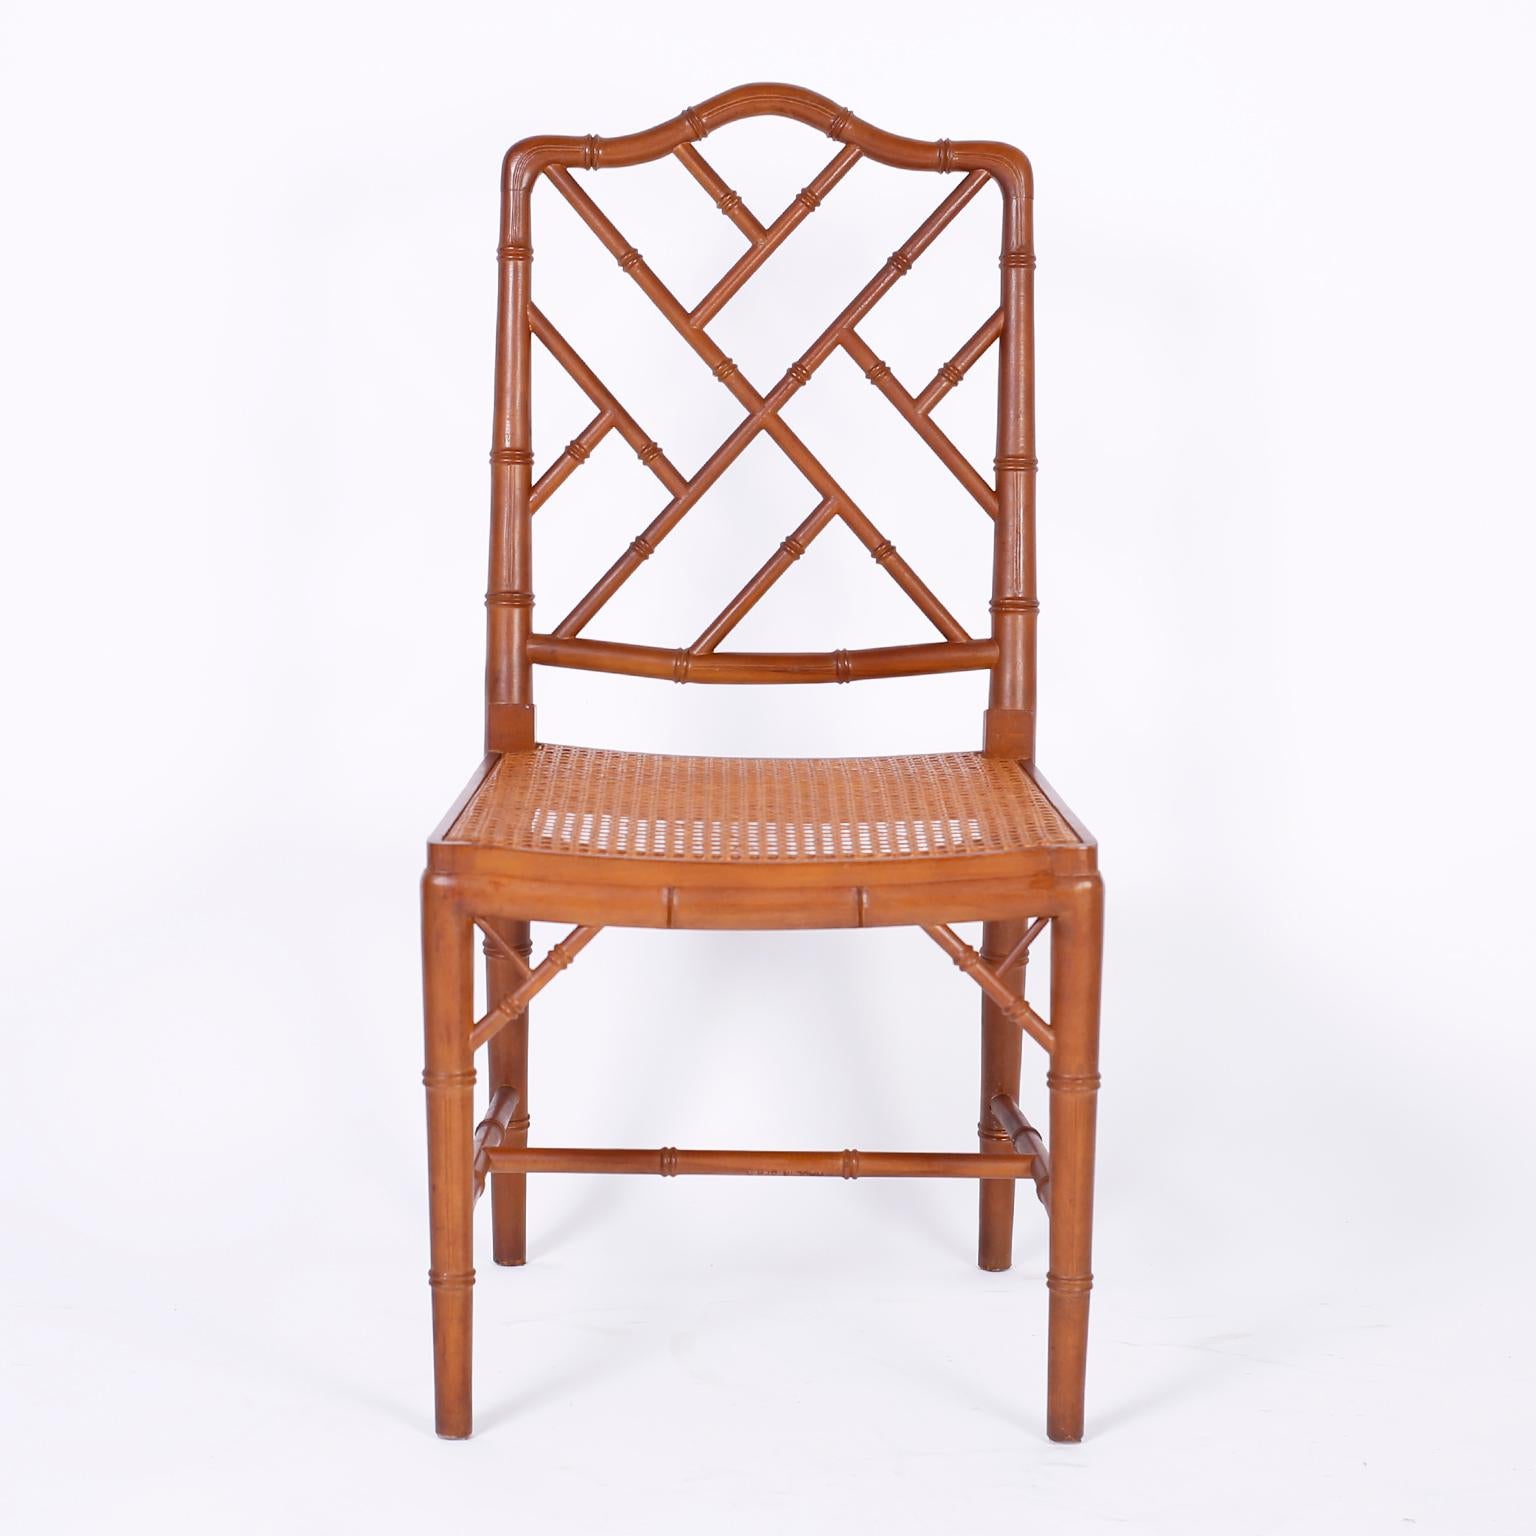 Set of eight faux bamboo fruitwood dining chairs, two arms and six sides, with Classic trellis backs and arms, caned seats, Asian style brackets and elegant tapered legs.

Armchairs measure: H 36.5, W 23, D 22, SH 16.5
Side chairs measure: H